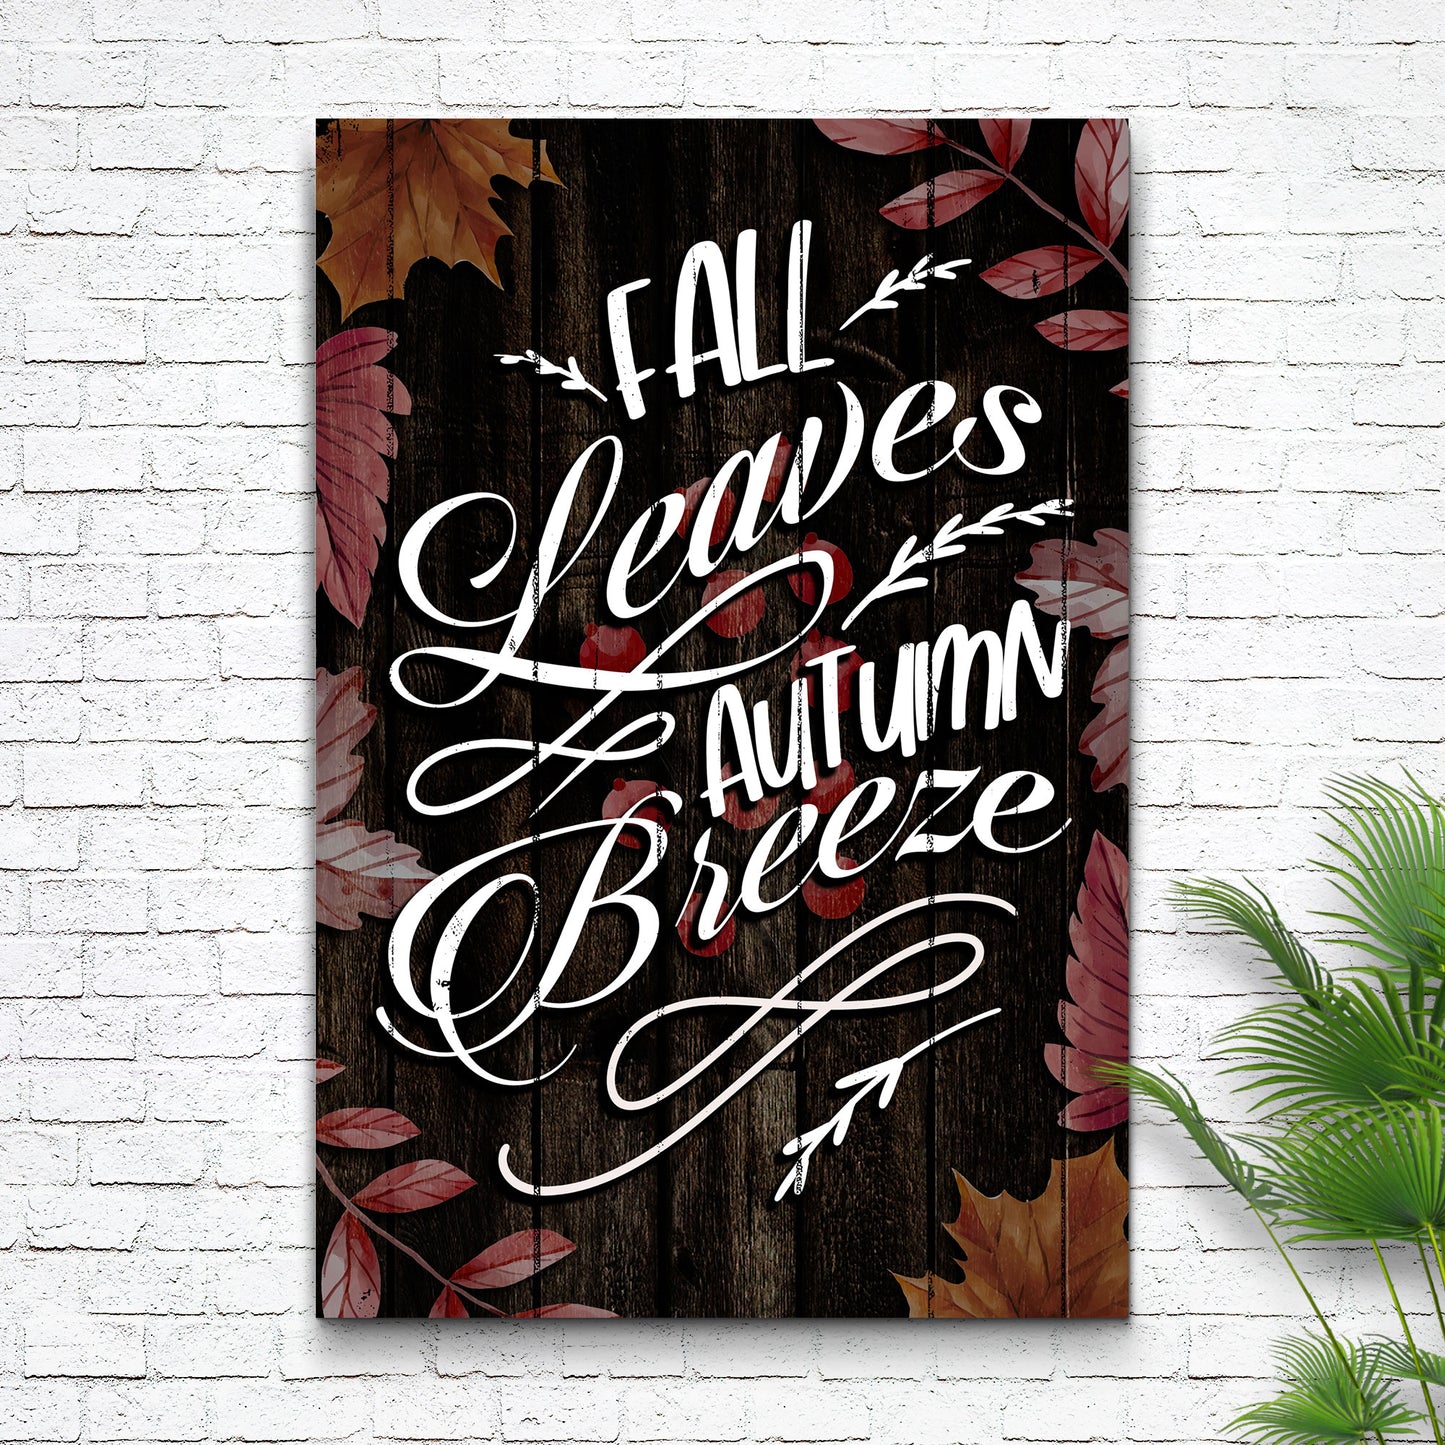 Fall Leaves Autumn Breeze Sign - Image by Tailored Canvases